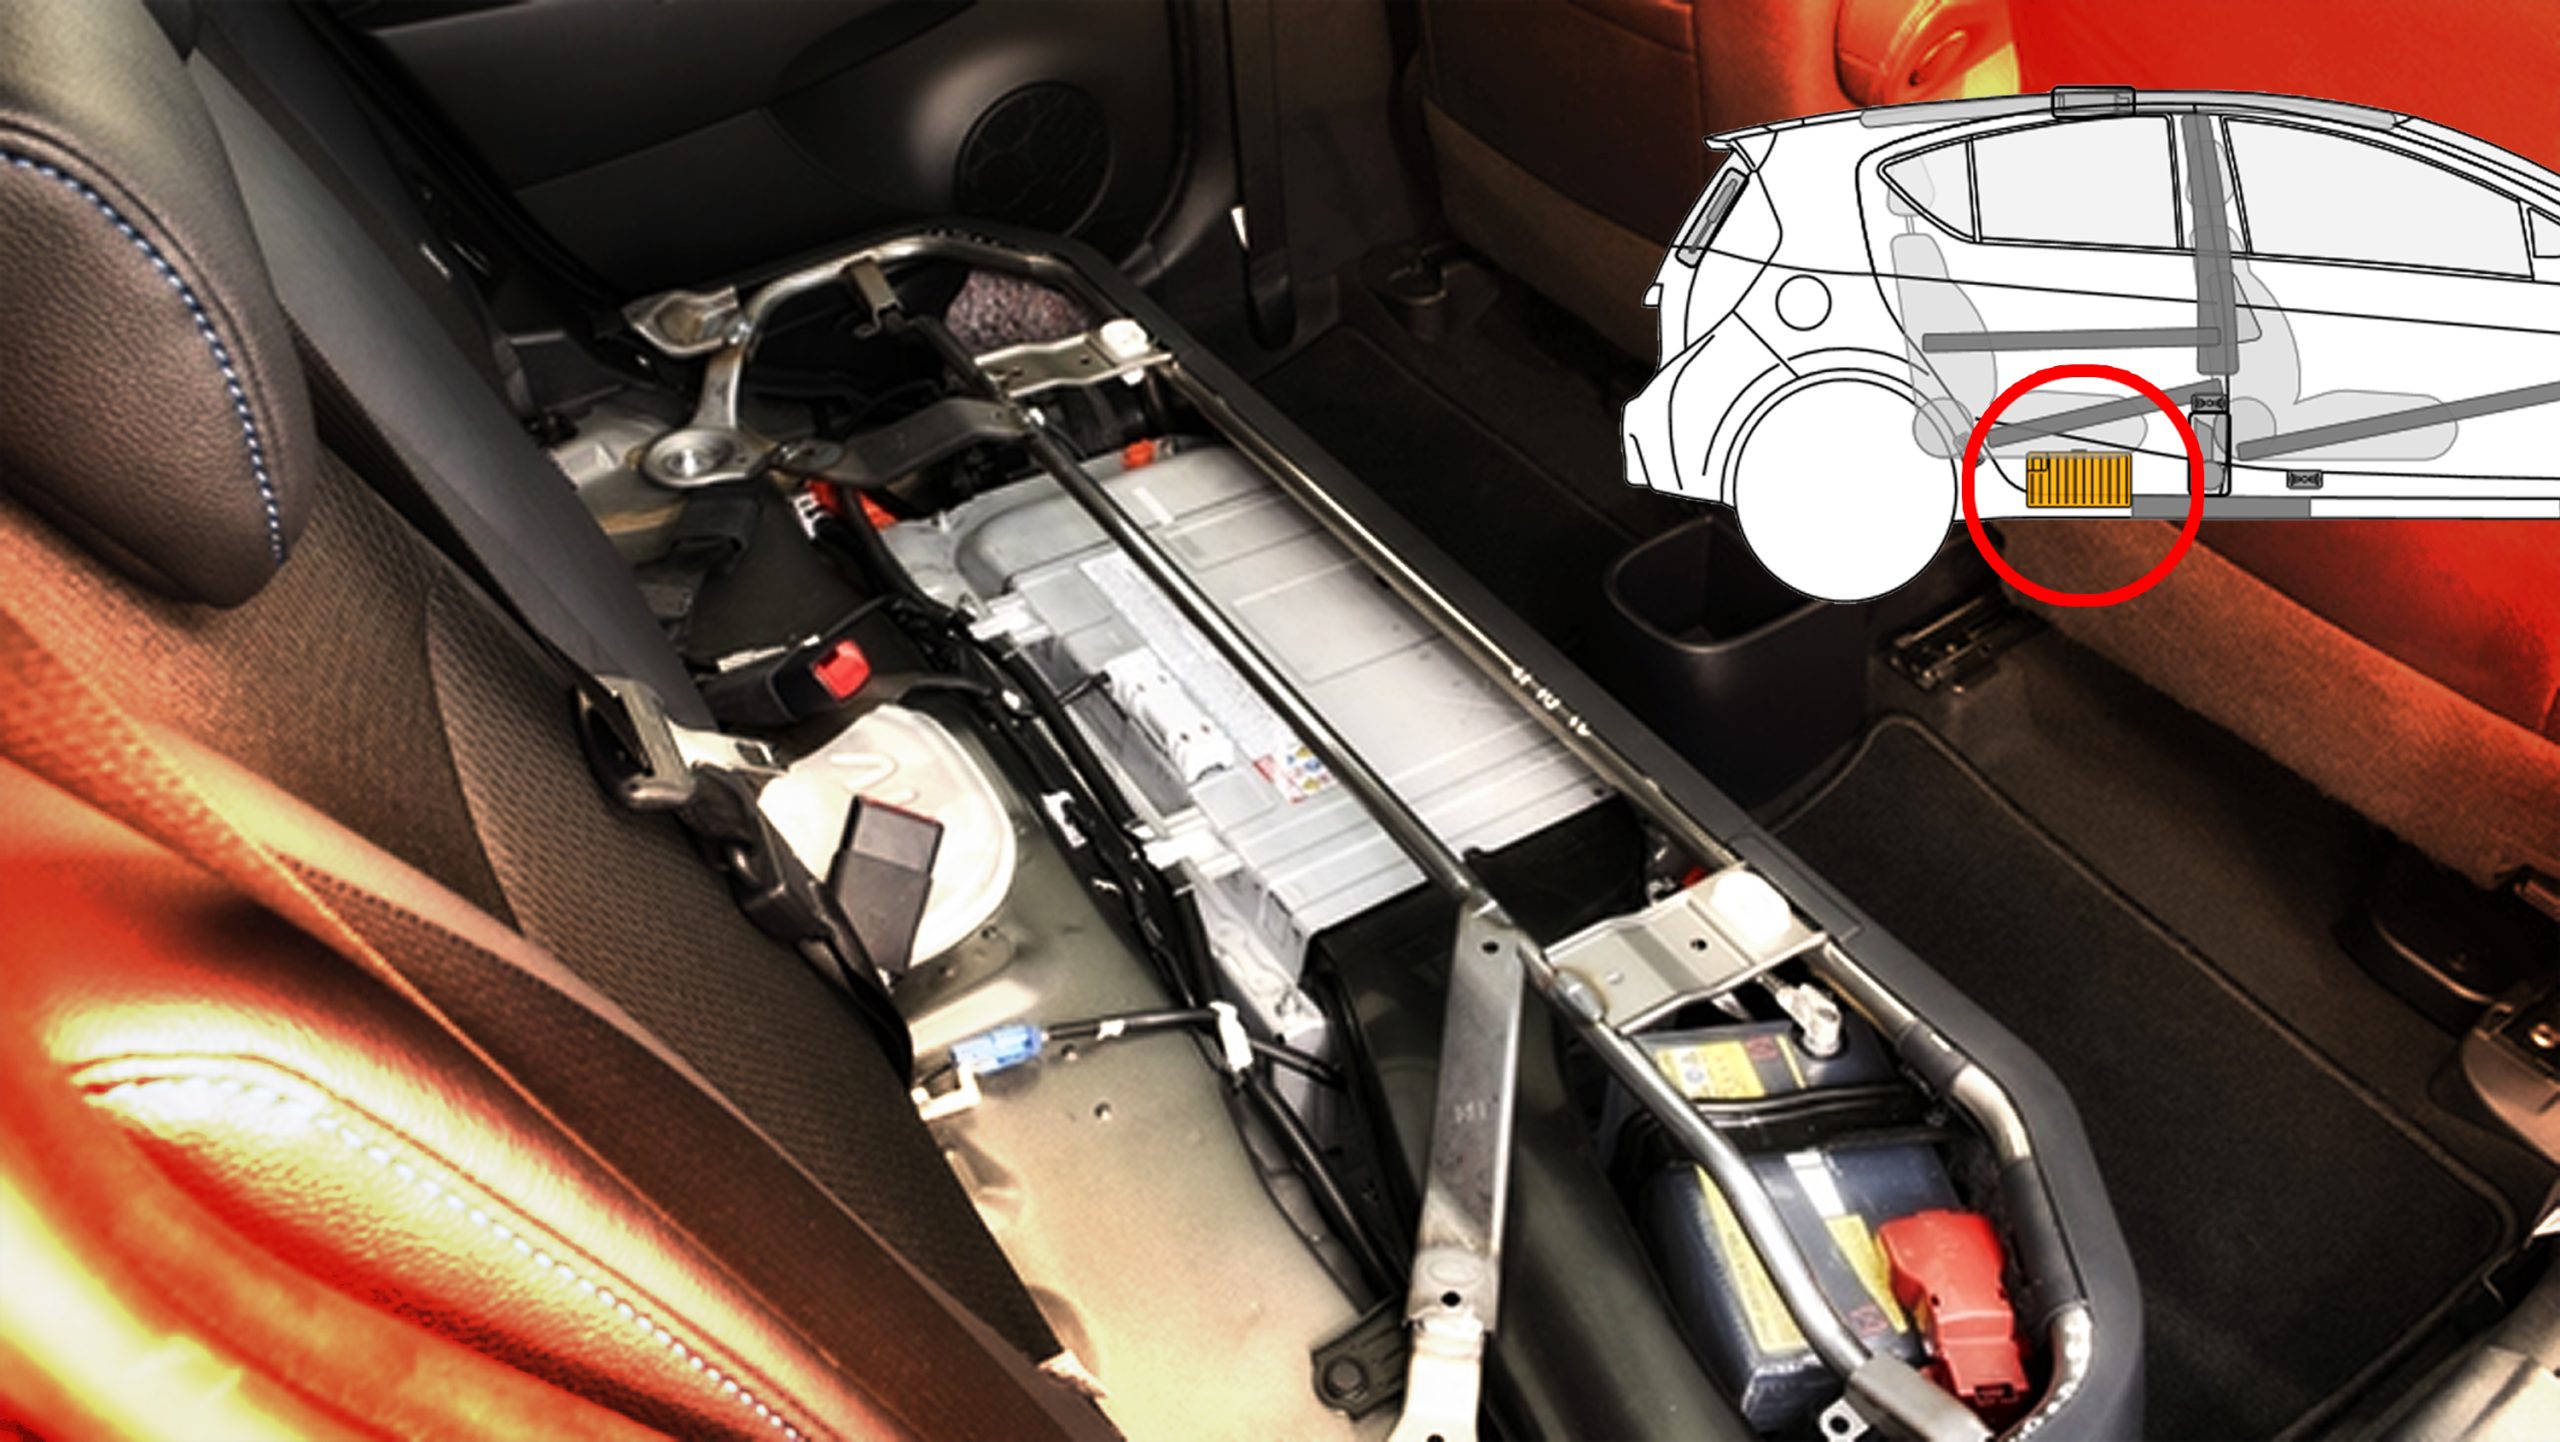 Hybrid/Electric car battery pack positioned under the back seat